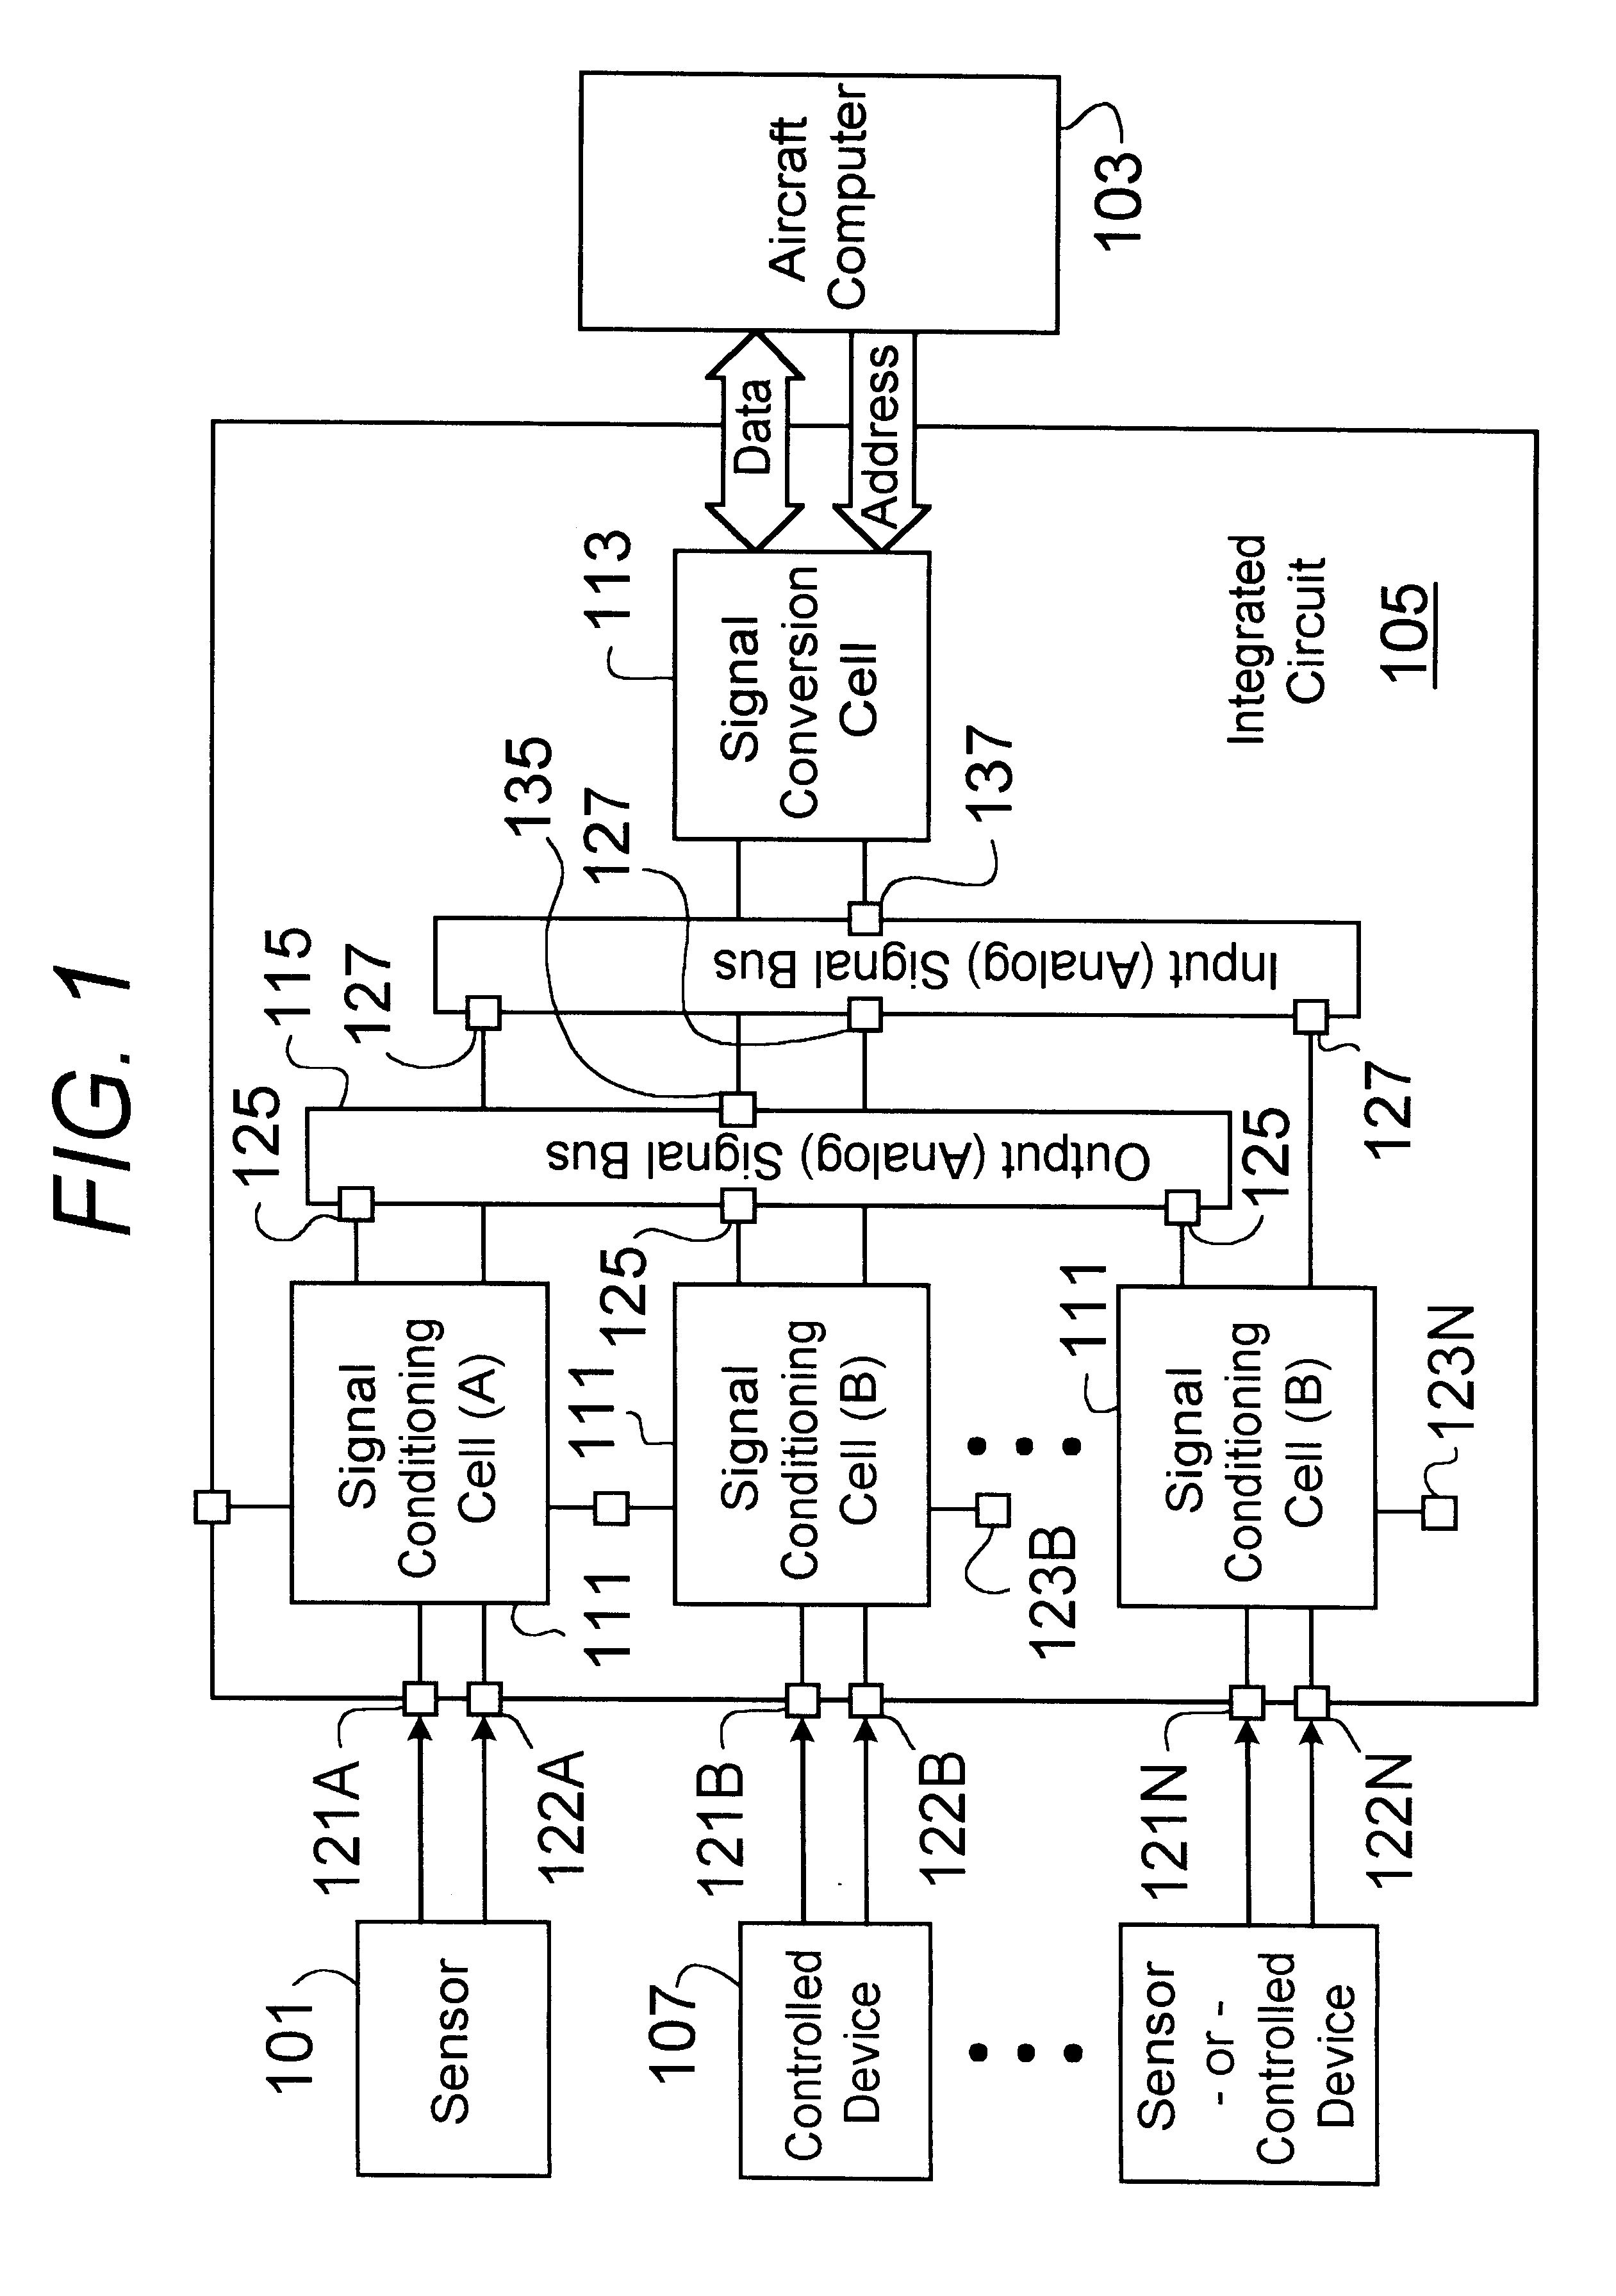 Integrated circuit for conditioning and conversion of bi-directional discrete and analog signals